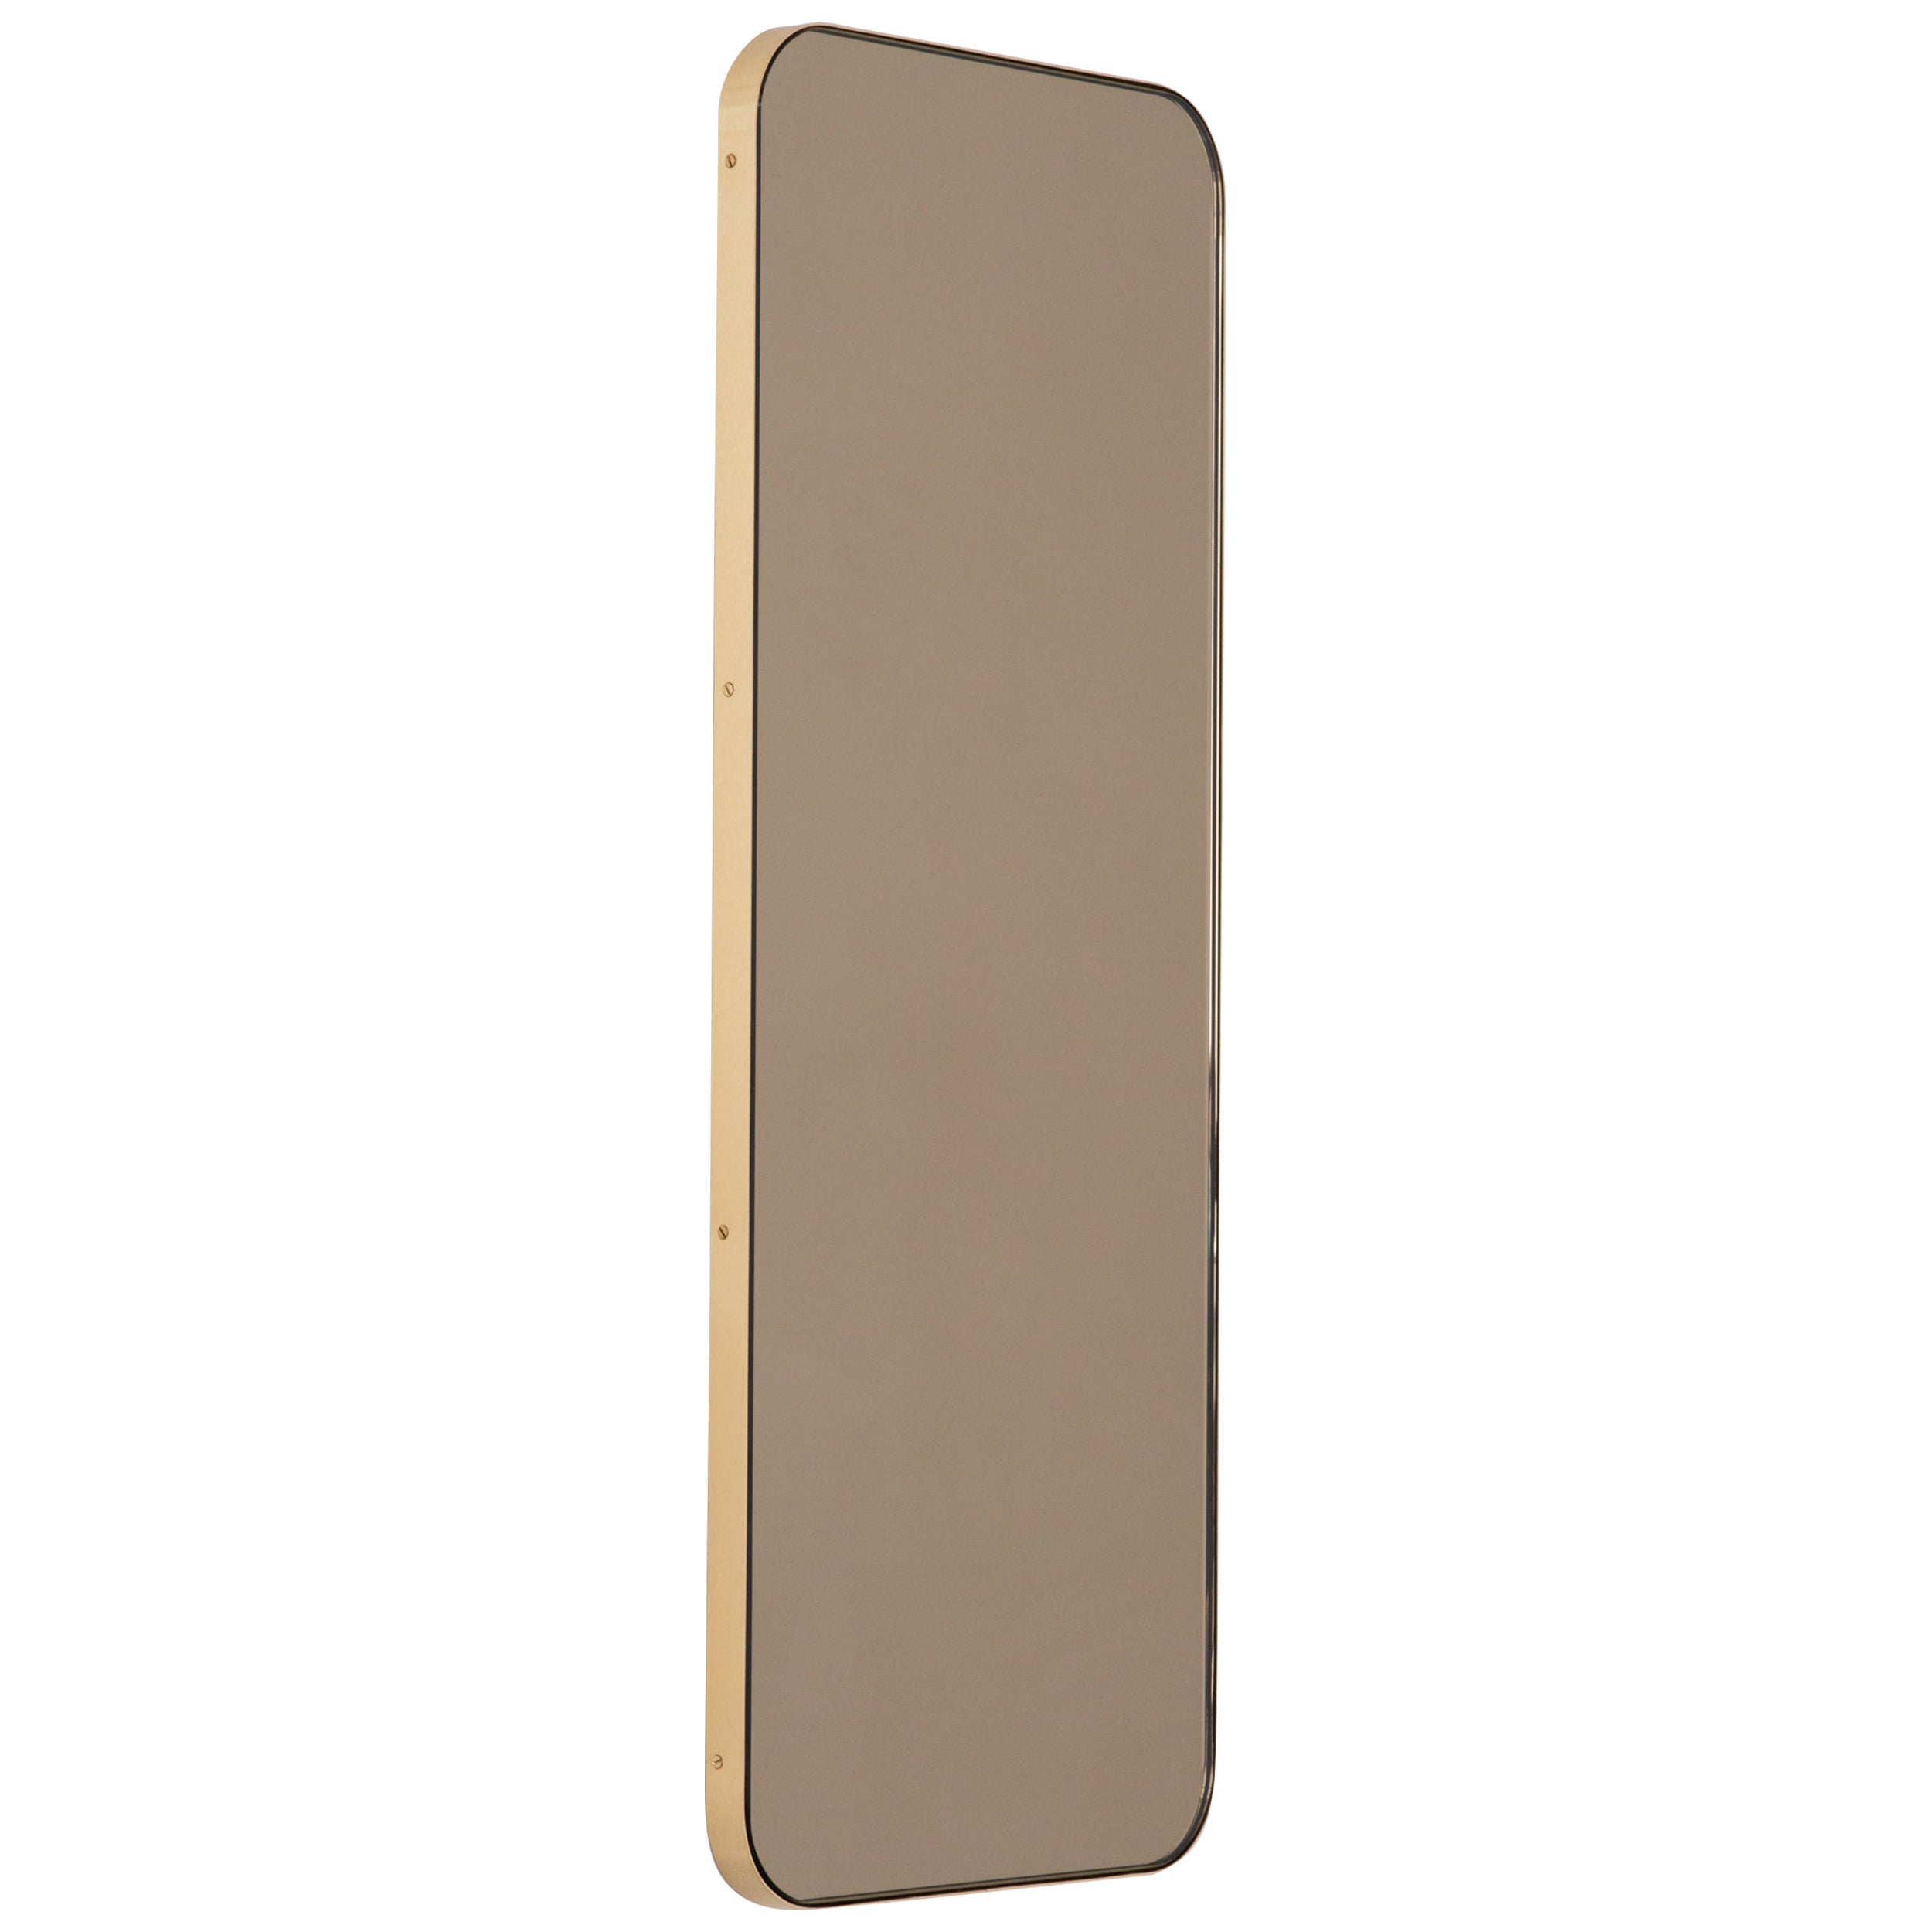 Quadris Bronze Tinted Rectangular Contemporary Mirror with a Brass Frame, Large